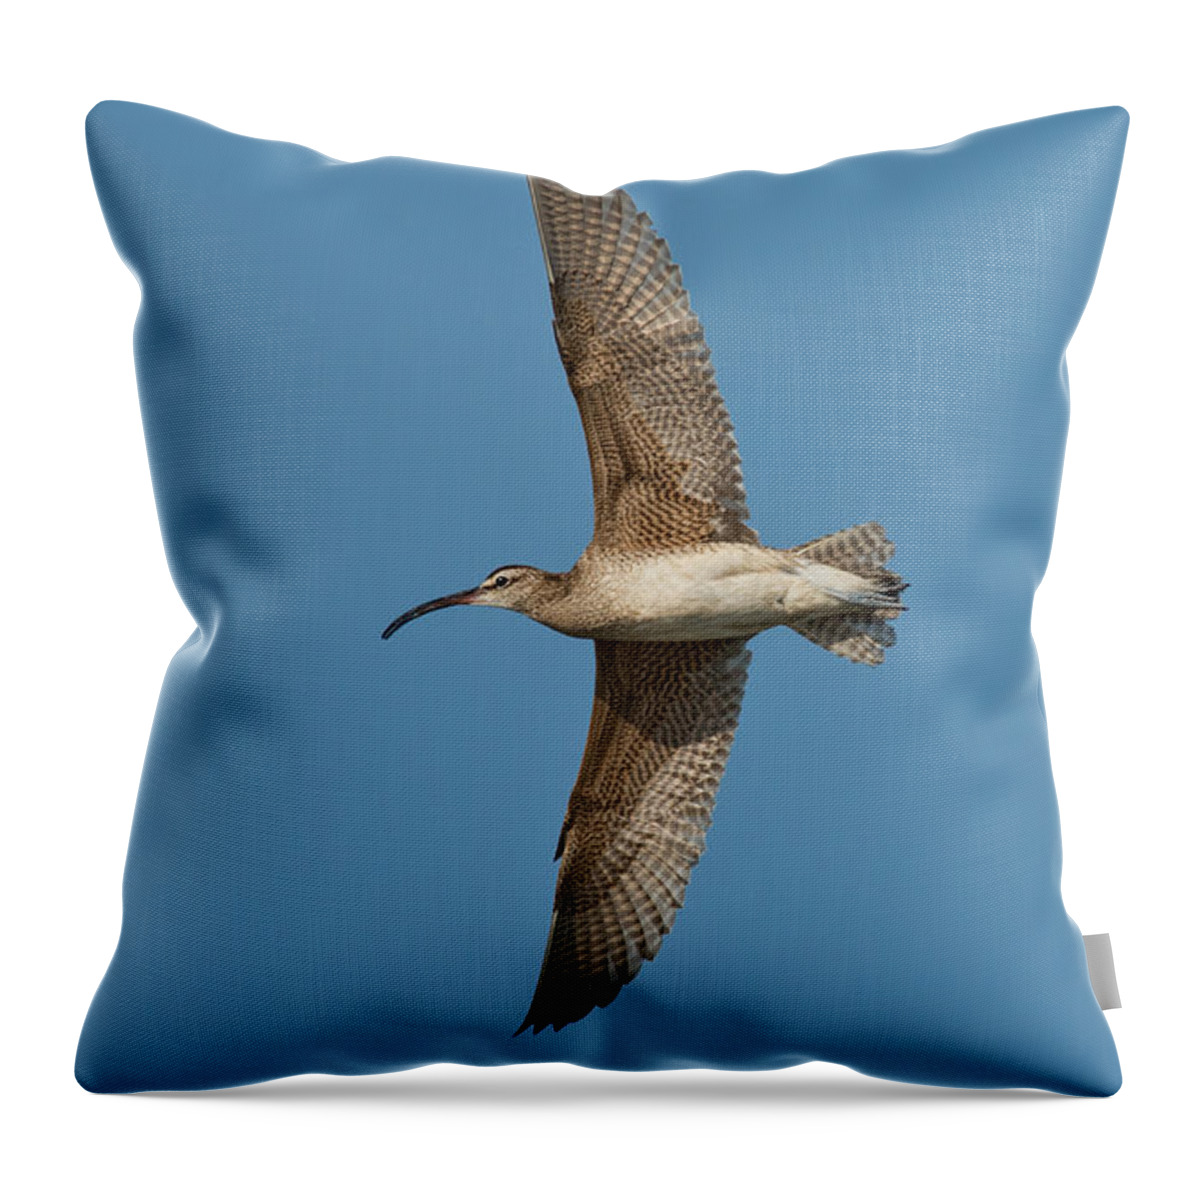 Fauna Throw Pillow featuring the photograph Whimbrel In Flight by Anthony Mercieca